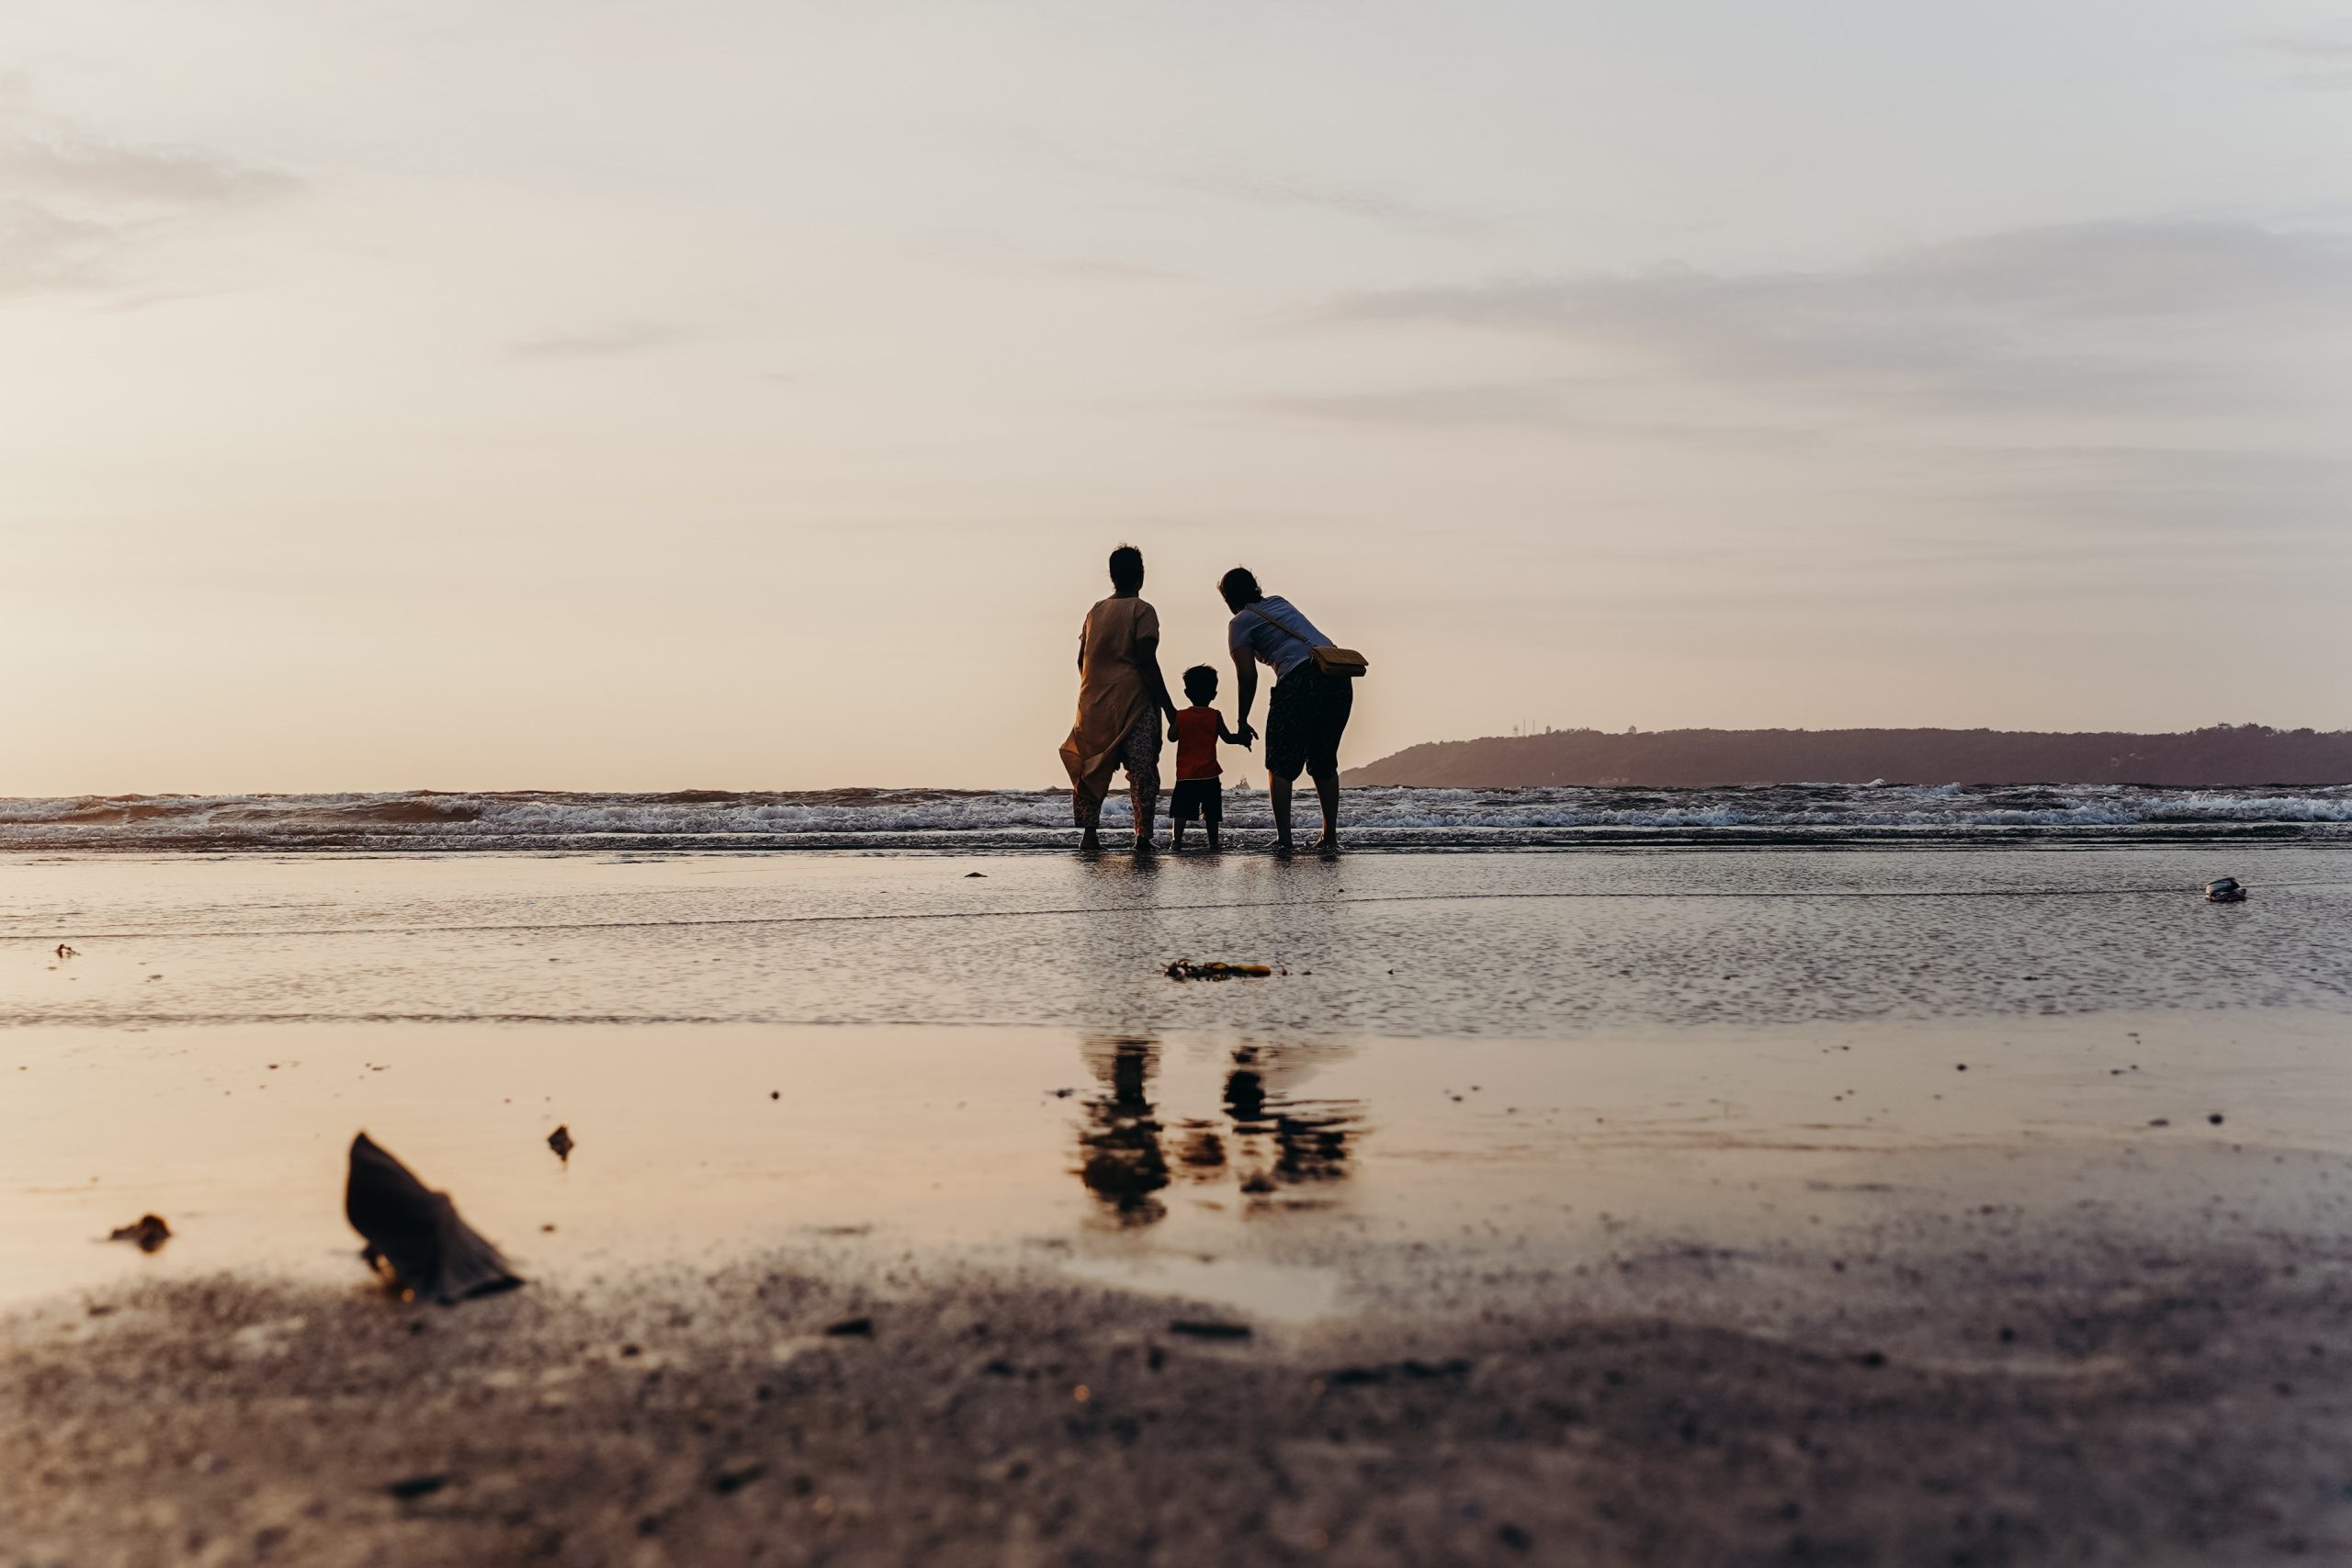 Family of three walking on the beach. Wet sand with a low hill also visible.